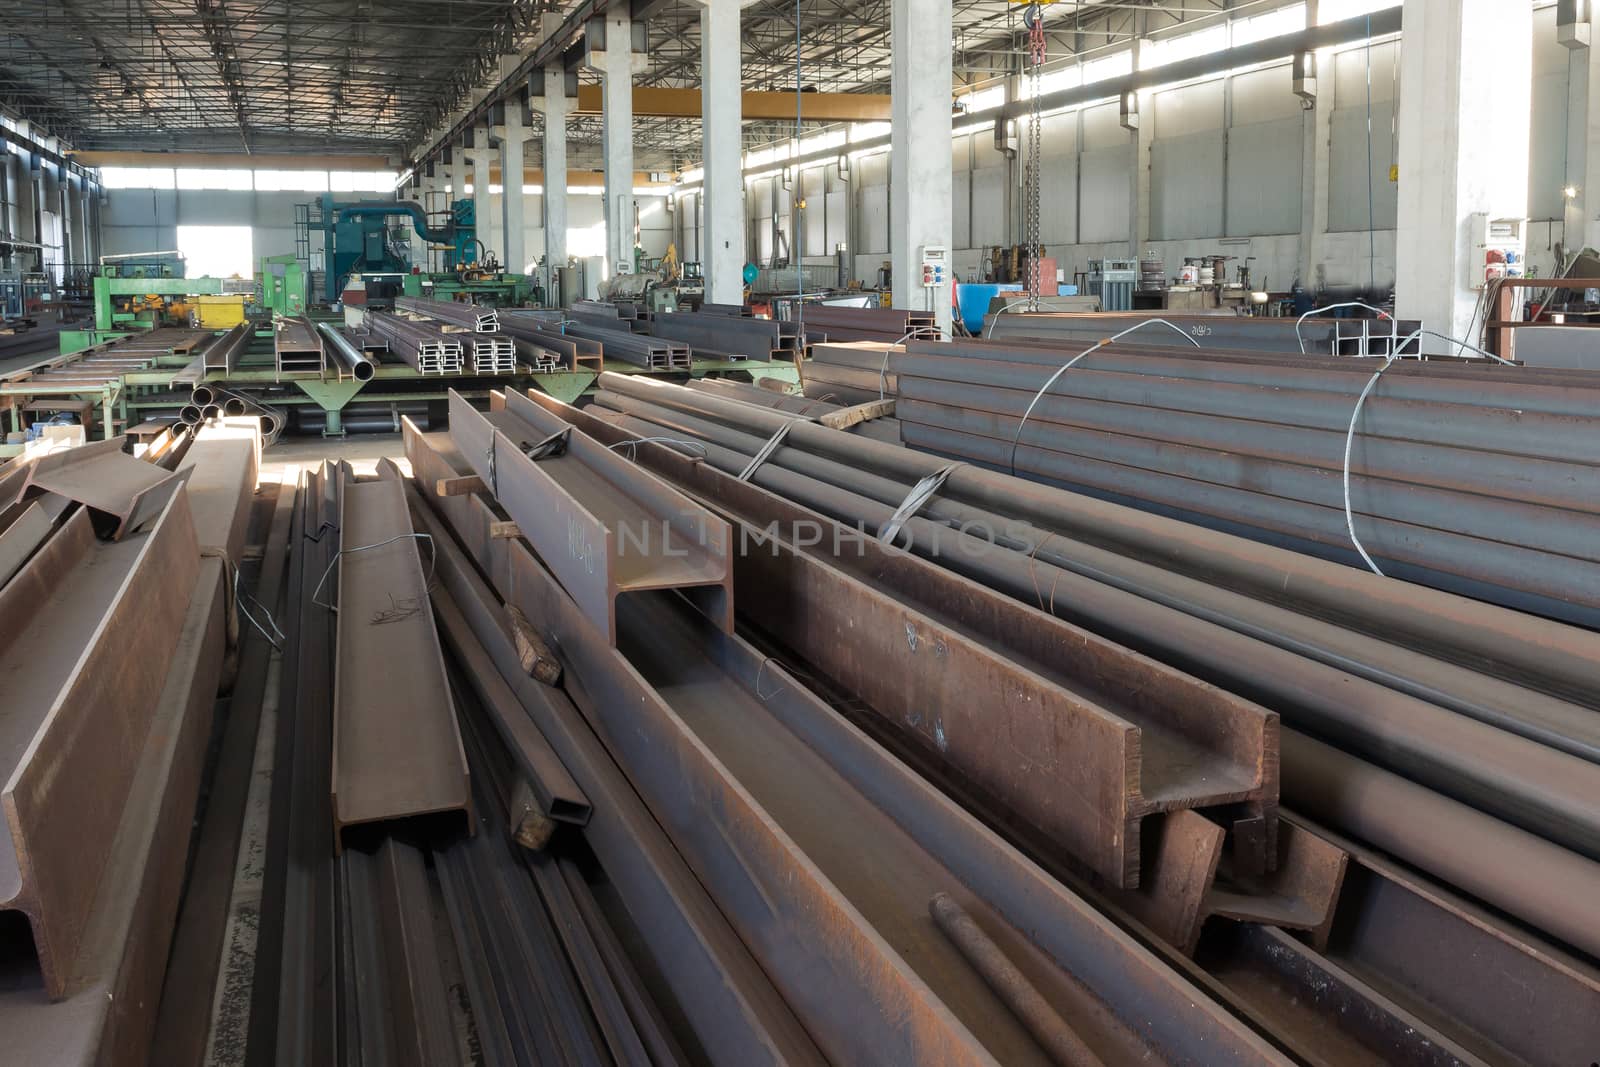 the numerous iron bars inside a factory